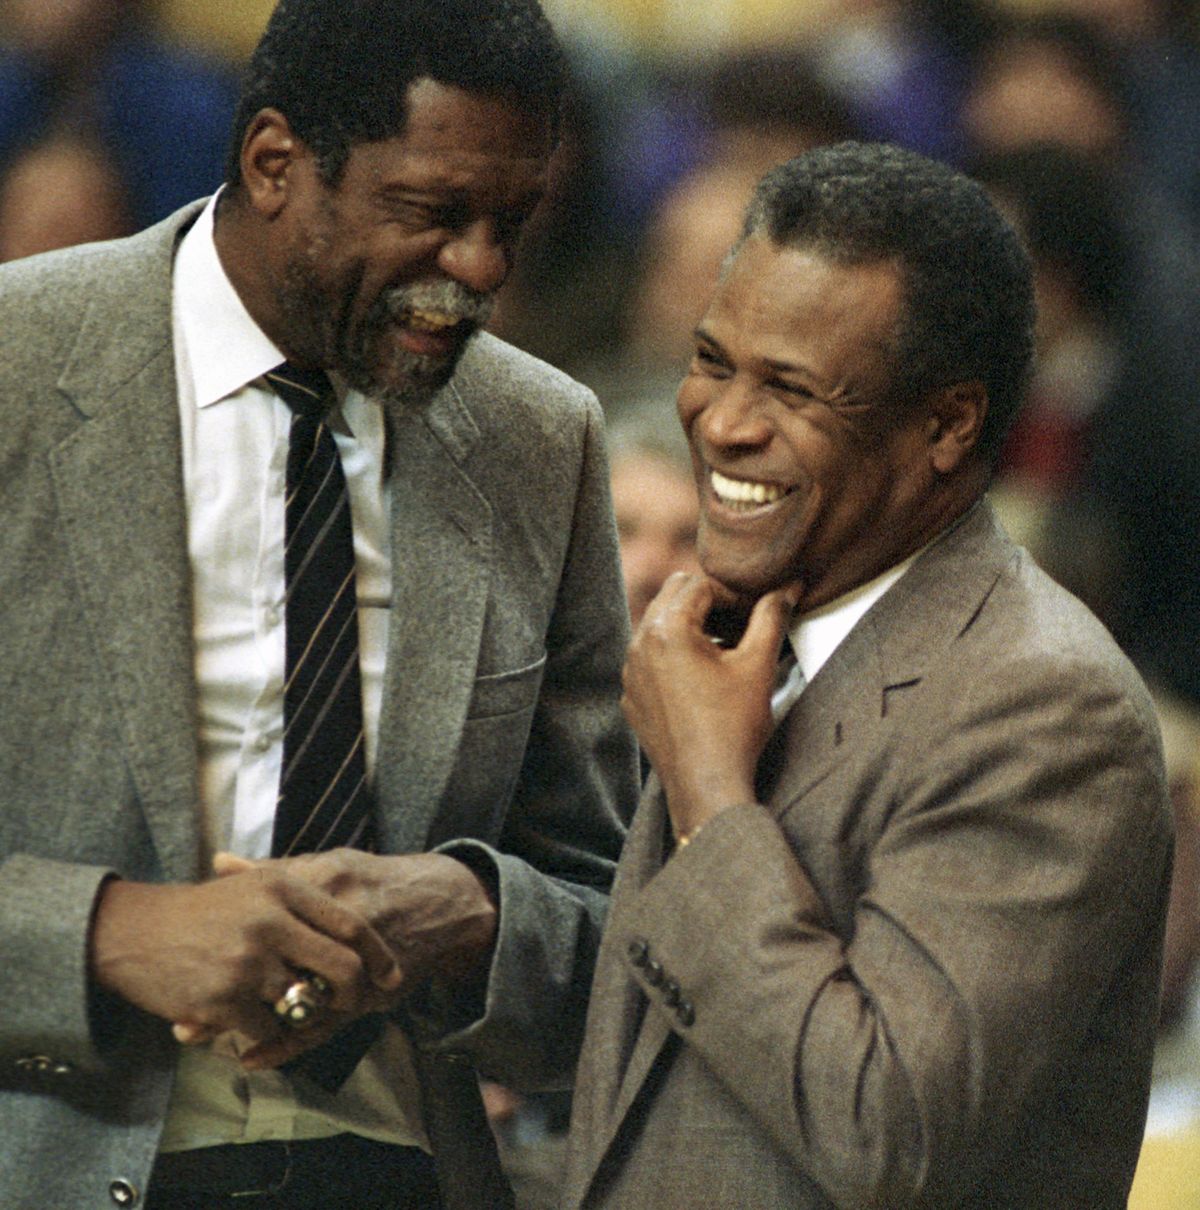 Former Boston Celtics teammates Bill Russell, left, and K.C. Jones meet before the start of an NBA game in January 1988 at the Boston Garden.  (Associated Press)